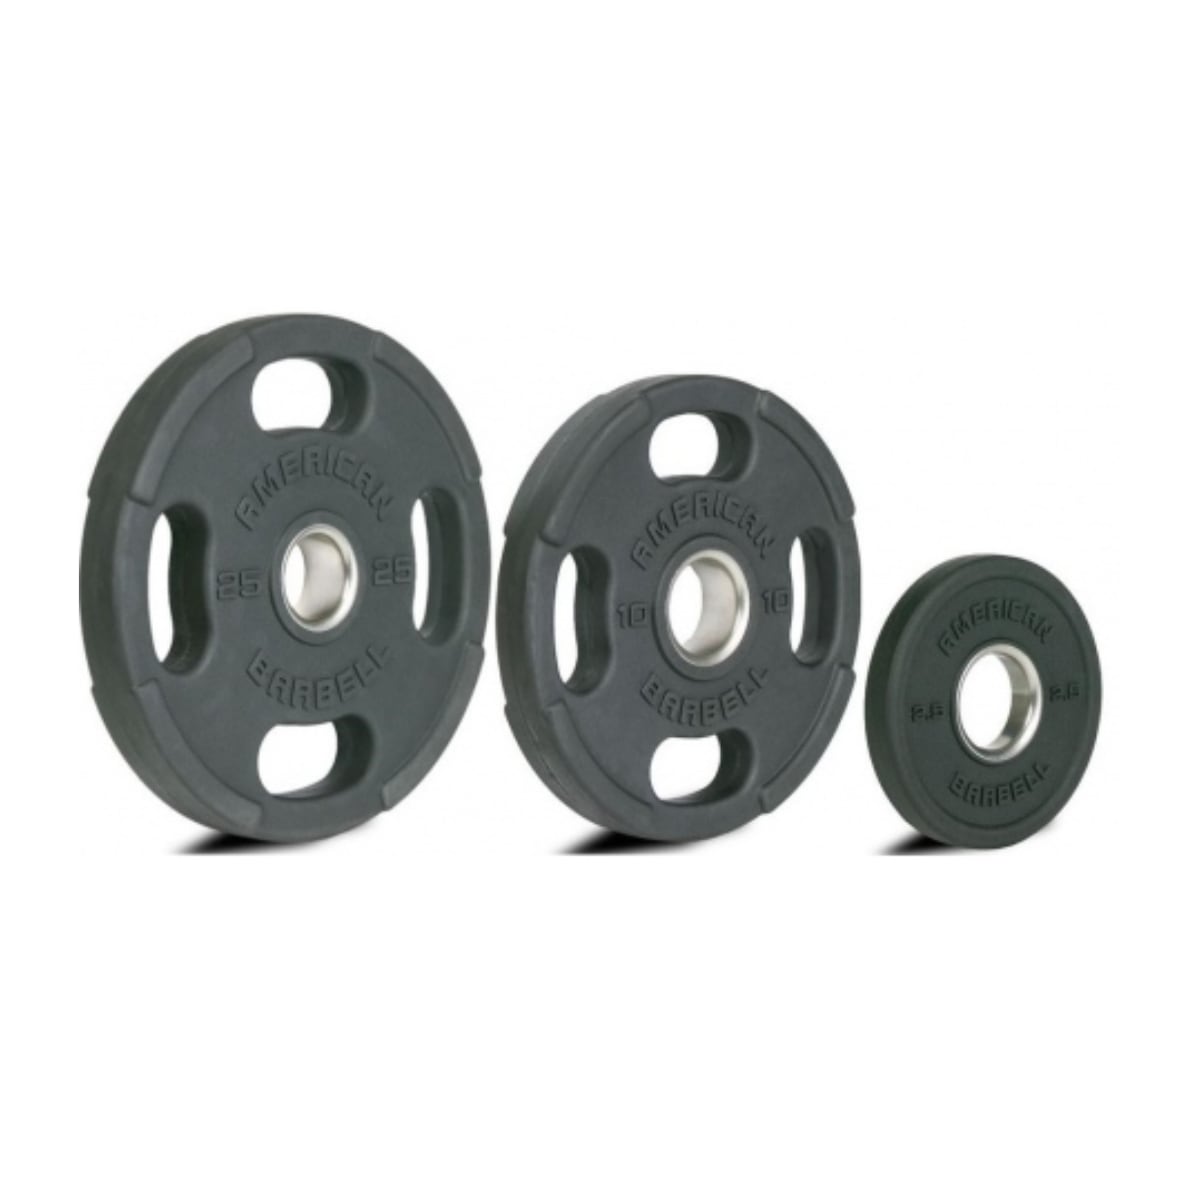 American Barbell Olympic Rubber Plates